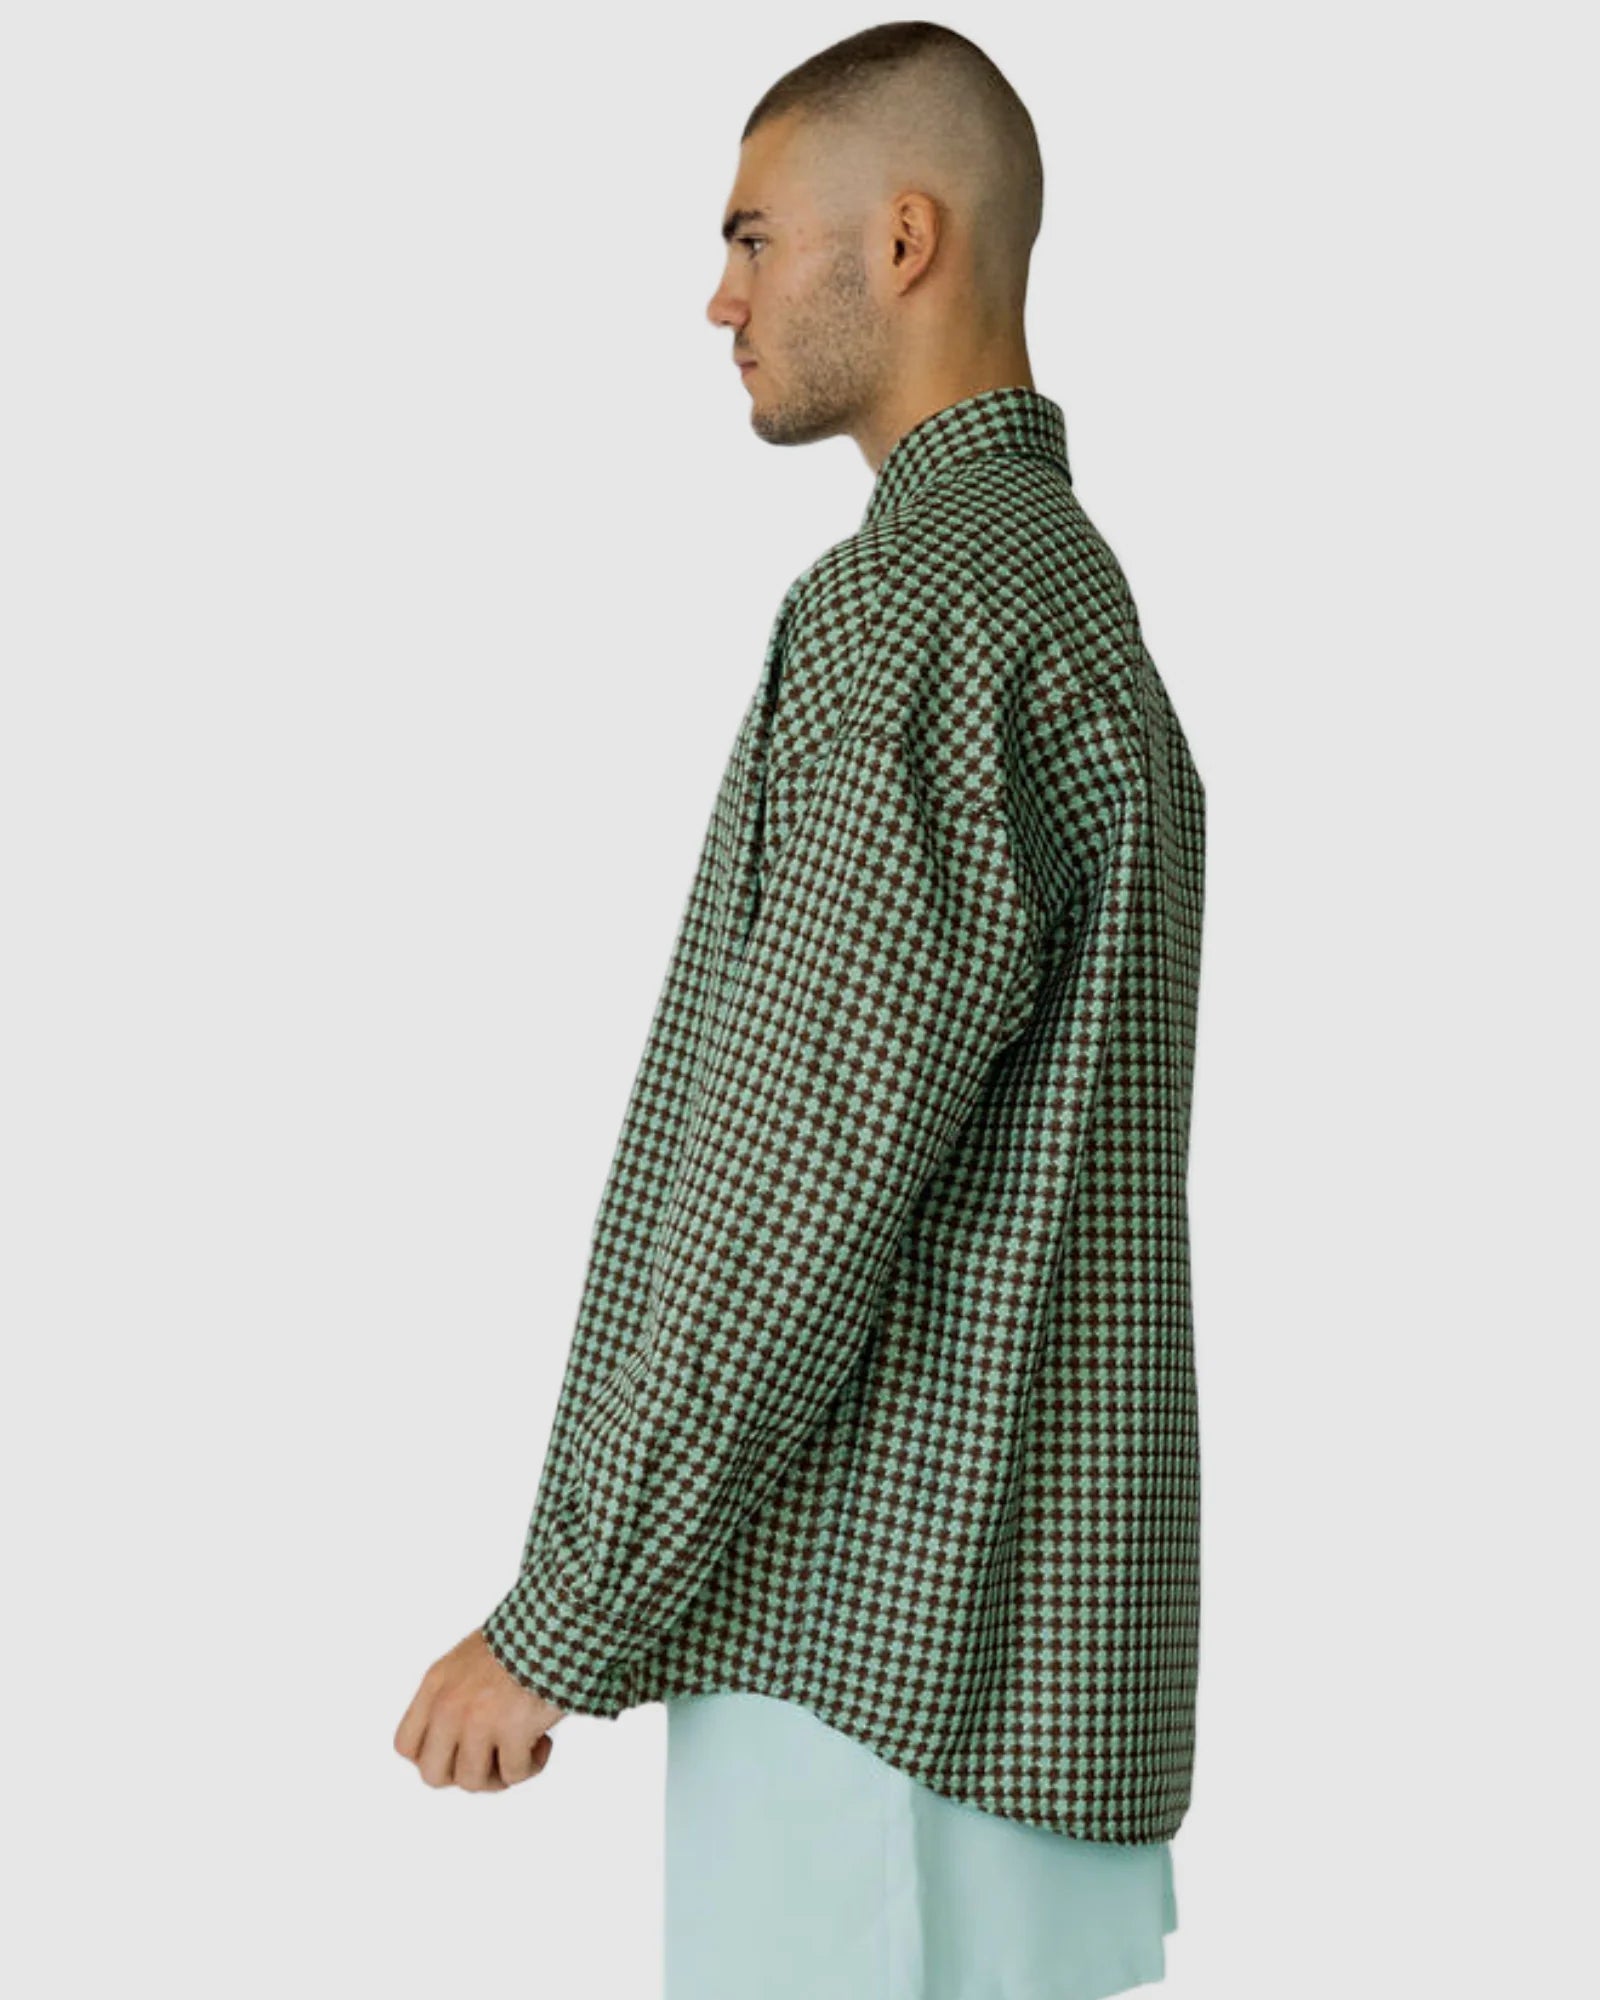 Justin Cassin Tucker Woven Shirt in Mint Color 3